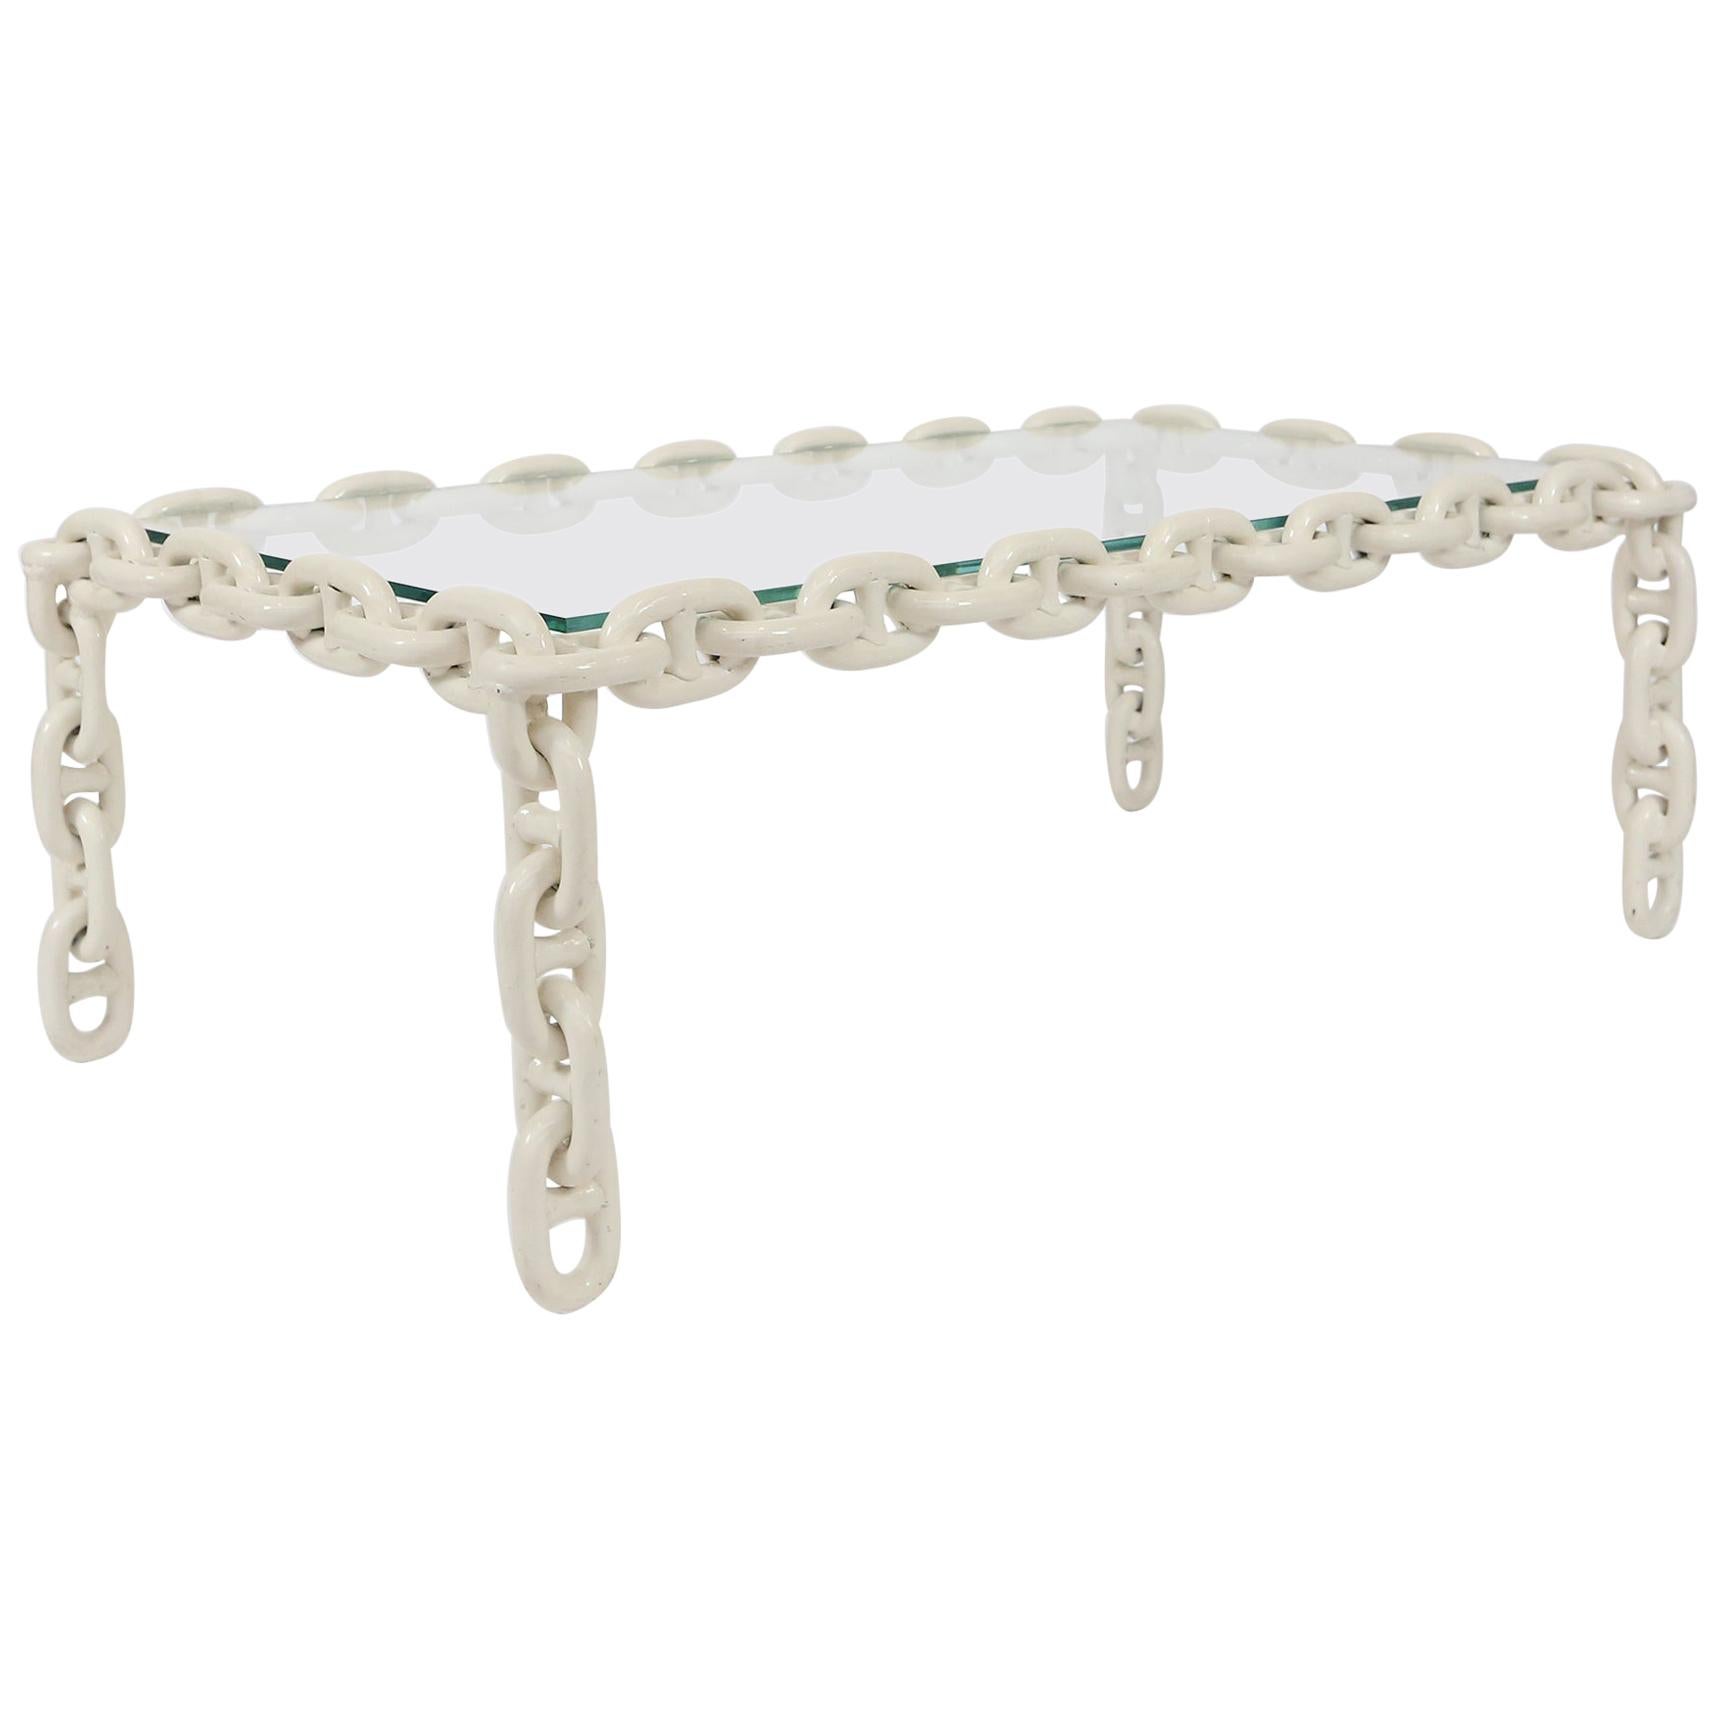 Nautical Brutalist Chain Link Coffee Table in White Steel and Safety Glass, 1970 For Sale